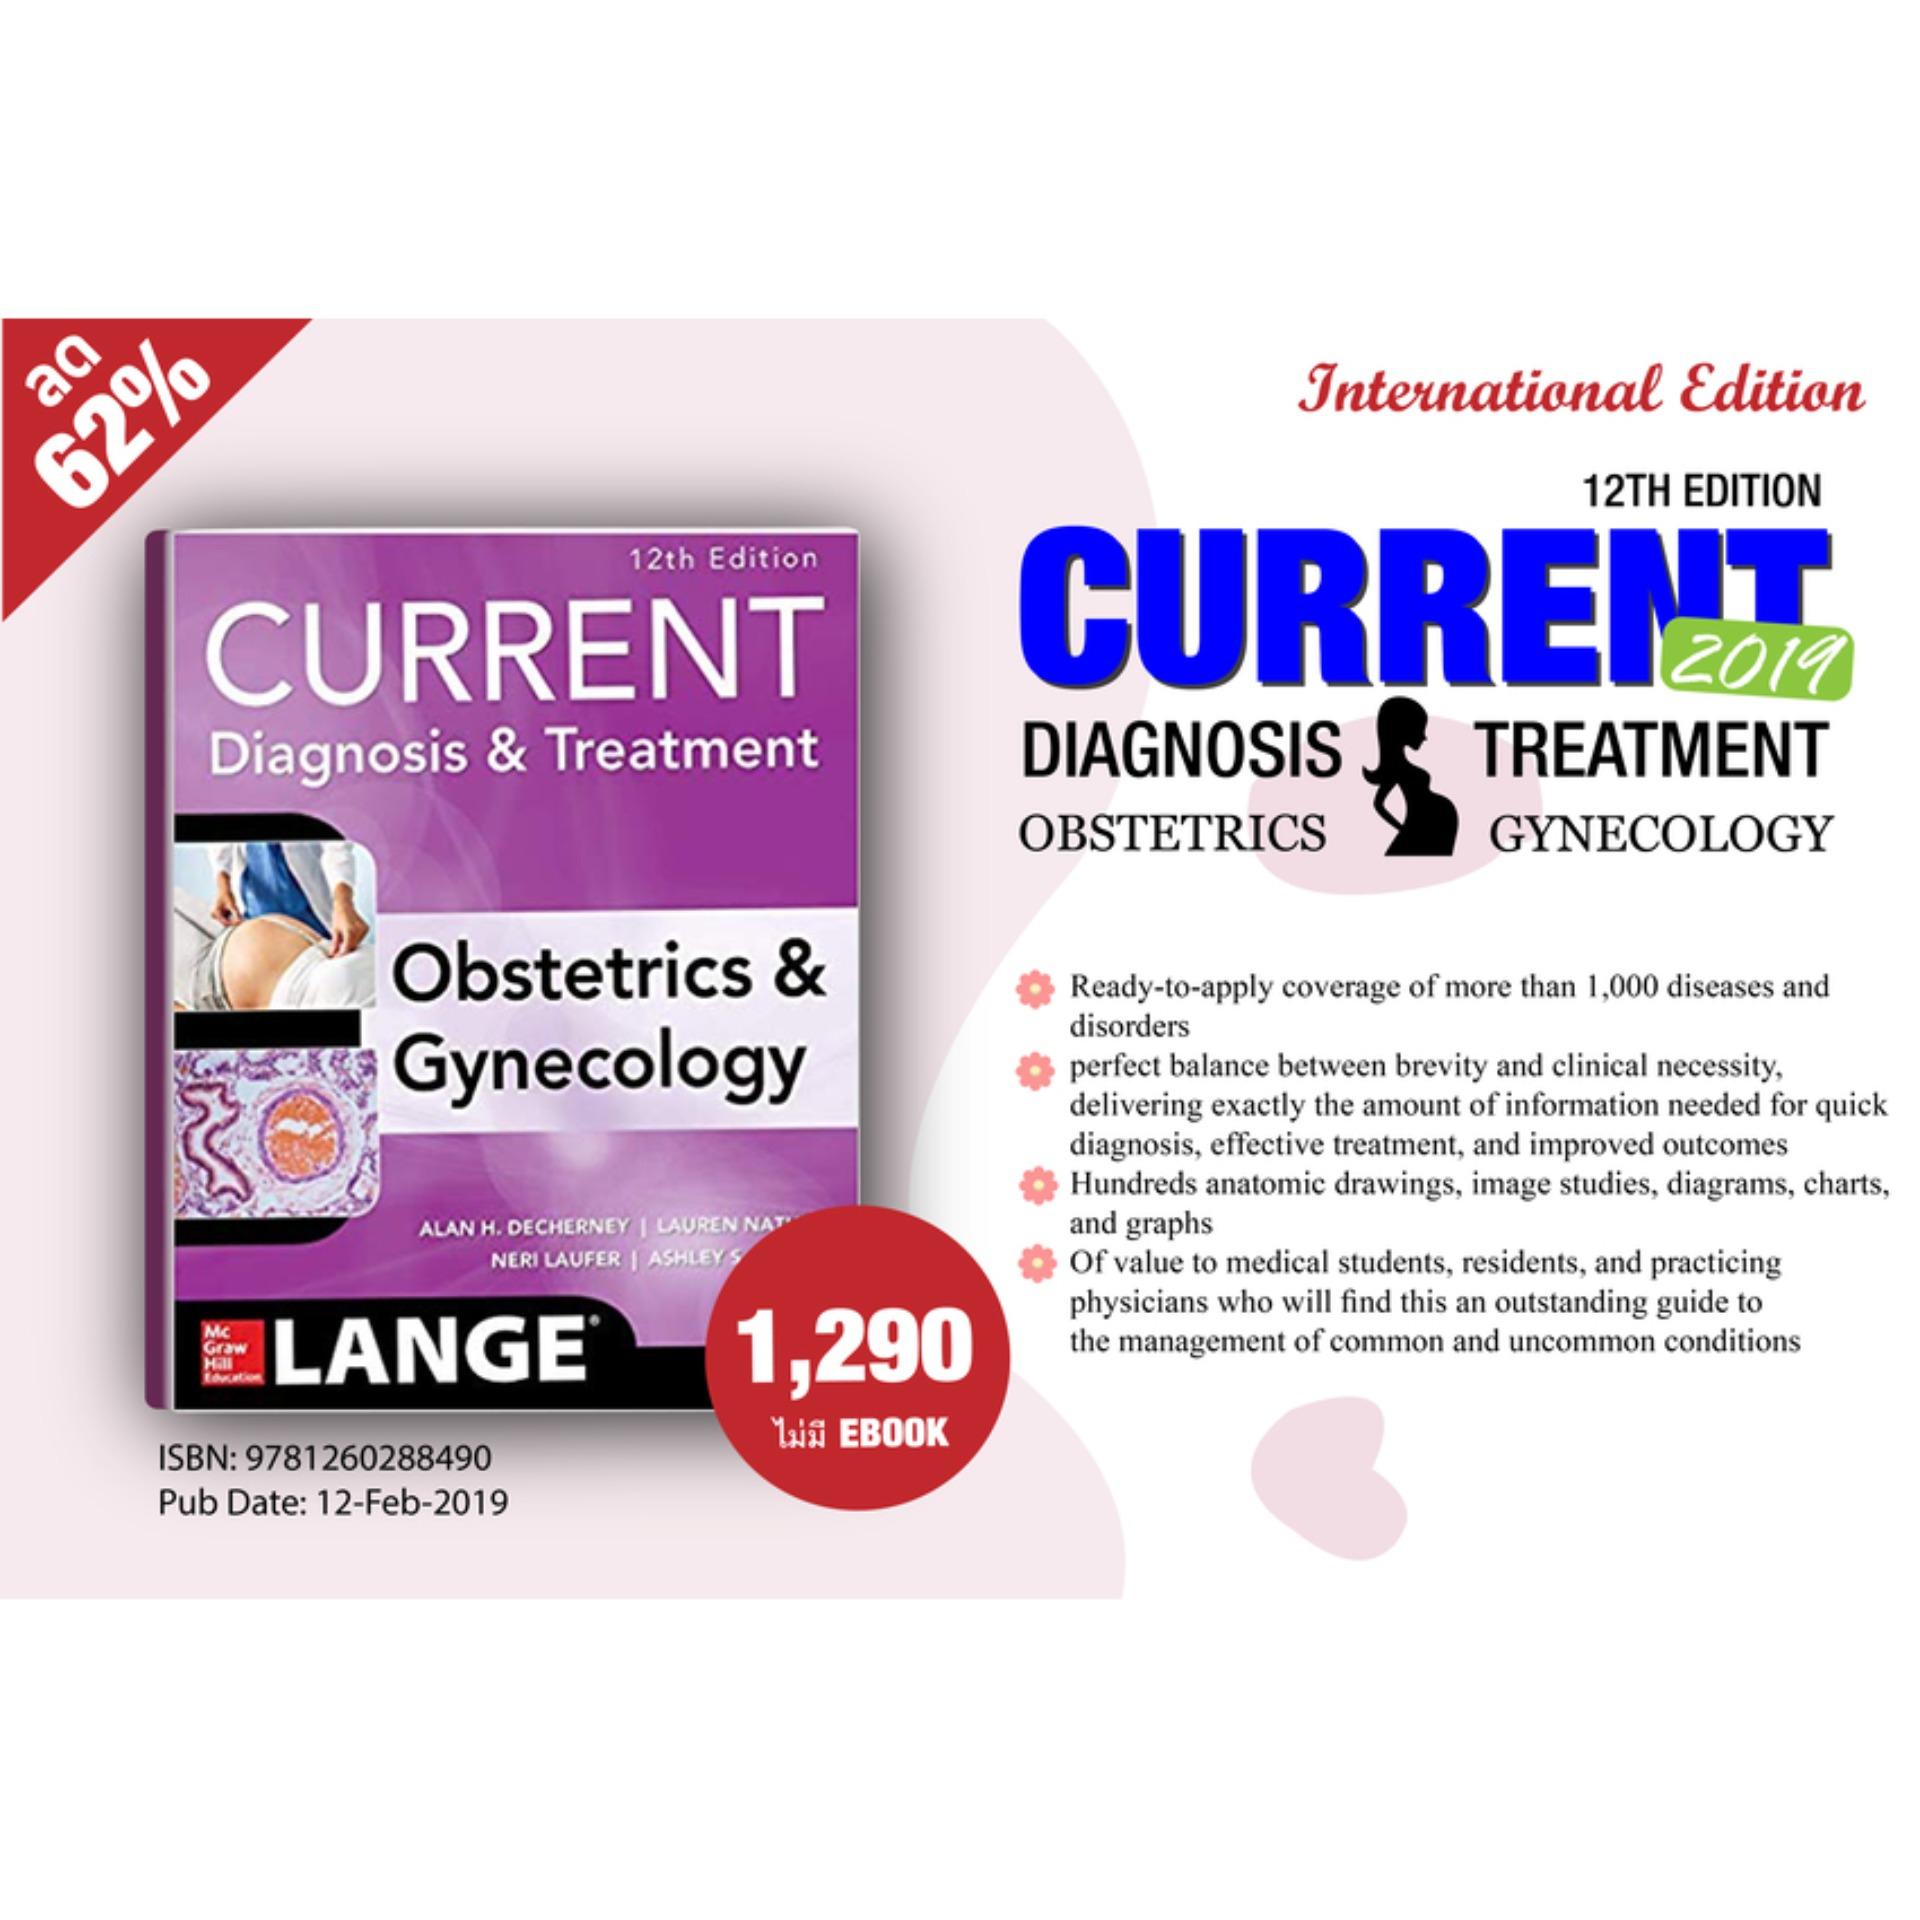 Current Diagnosis & Treatment Obstetrics & Gynecology, 12th edition